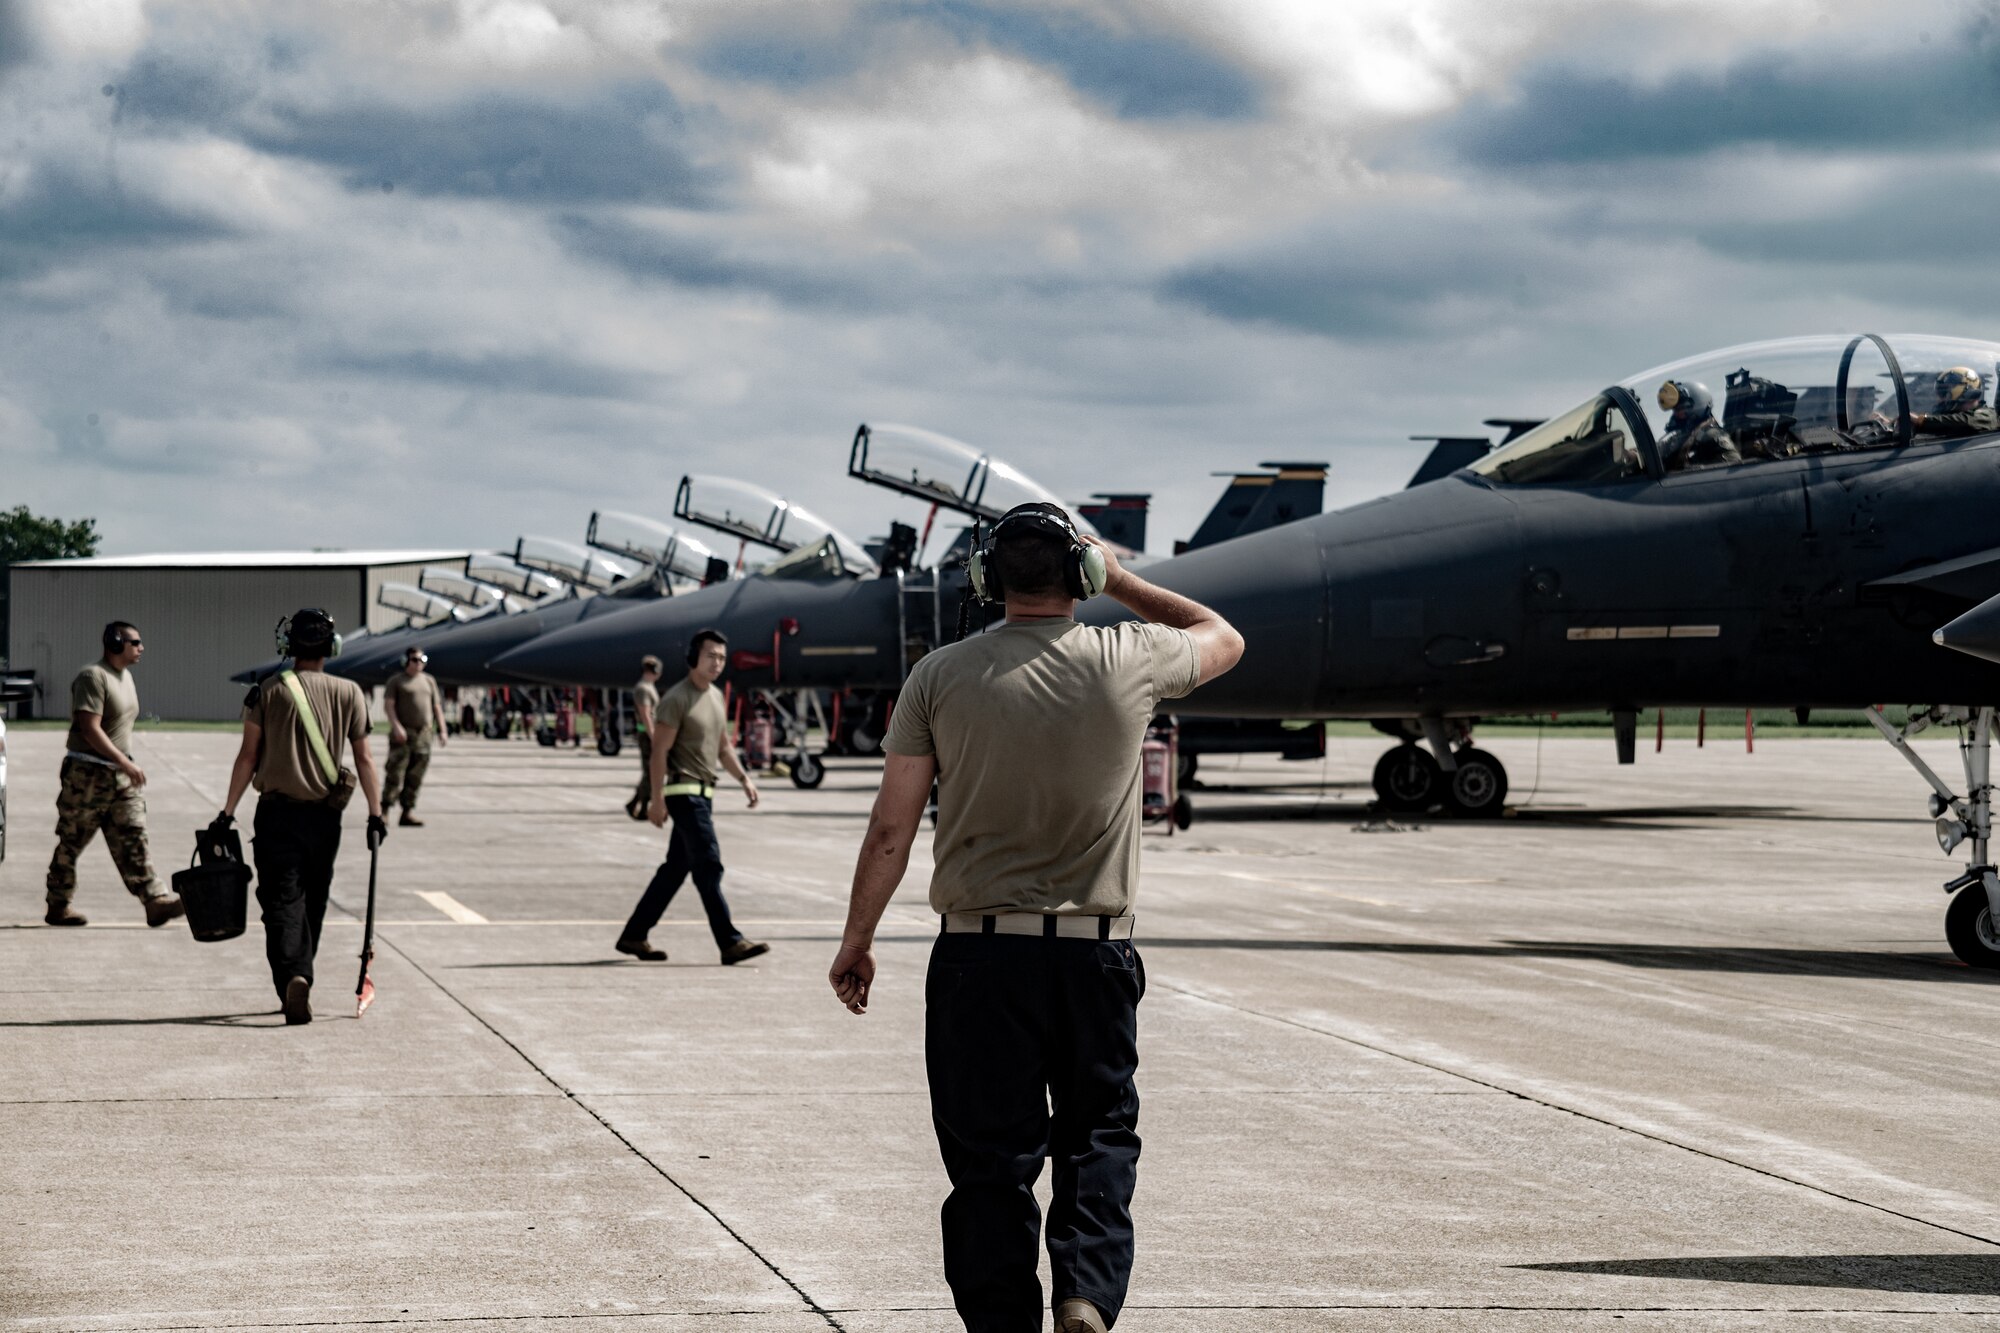 U.S. Air Force pilots and maintainers assigned to the 336th Fighter Squadron prepare F-15E Strike Eagle aircraft on the flightline at Terre Haute Regional Airport in preparation for exercise Jaded Thunder at Hulman Field Air National Guard Base, Ind., Aug. 15, 2021. Hulman Field, which is a dual-purpose, military and civilian airfield, is home to the Indiana National Guard’s 181st Intelligence Wing. (U.S. Air National Guard photo by Tech. Sgt. L. Roland Sturm)